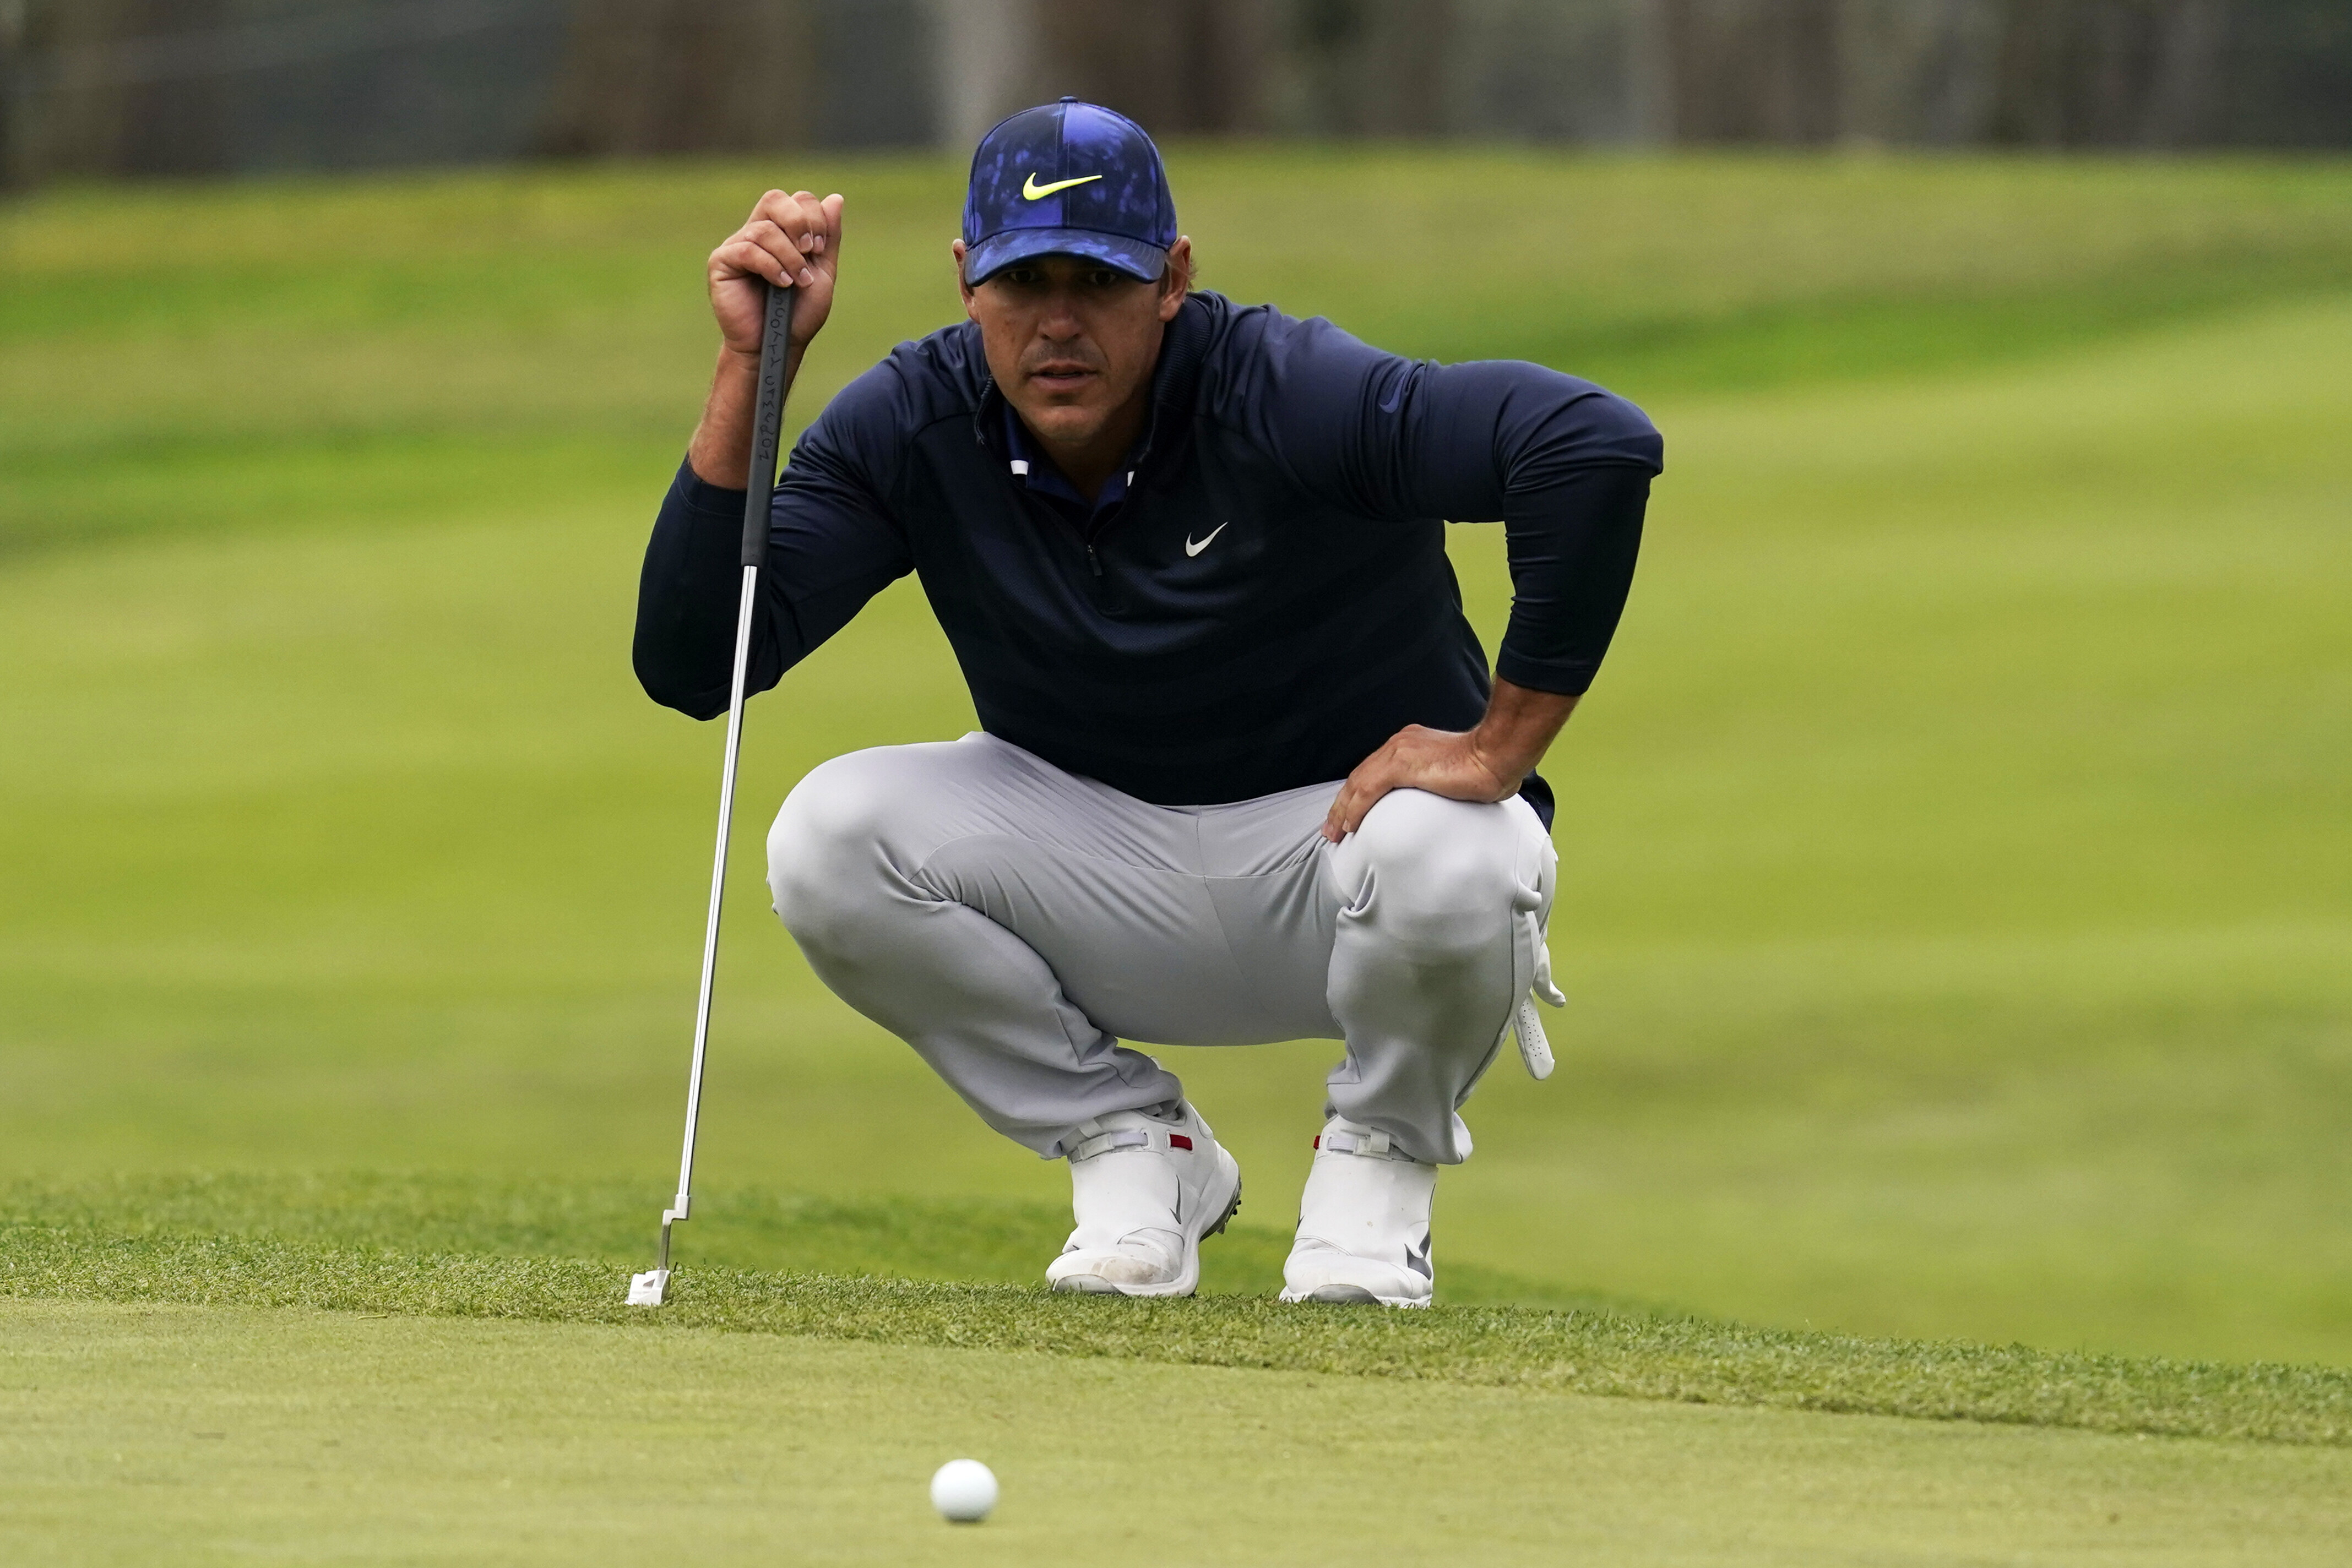 2021 Farmers Insurance Open Live stream, start time, TV channel, how to watch, Rory McIlroy, Brooks Koepka